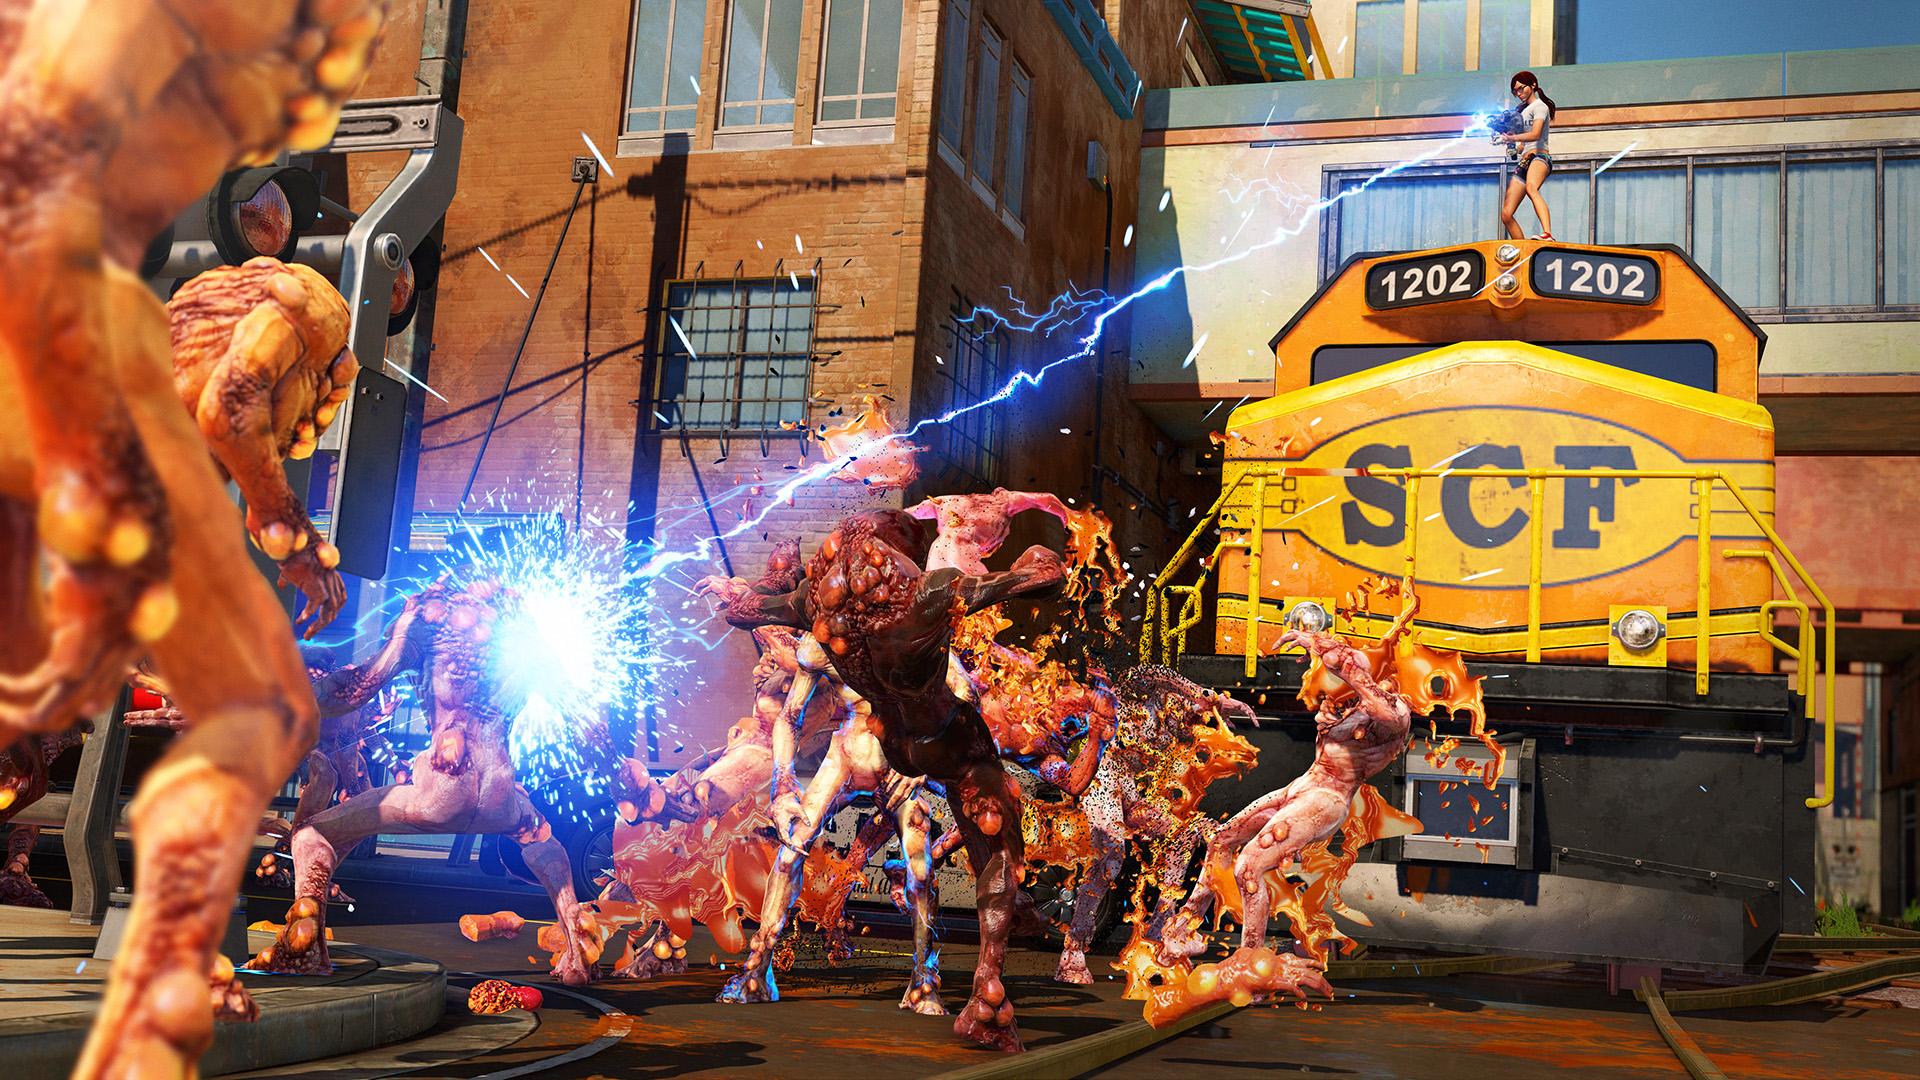 Sunset Overdrive - 8 Years Later 